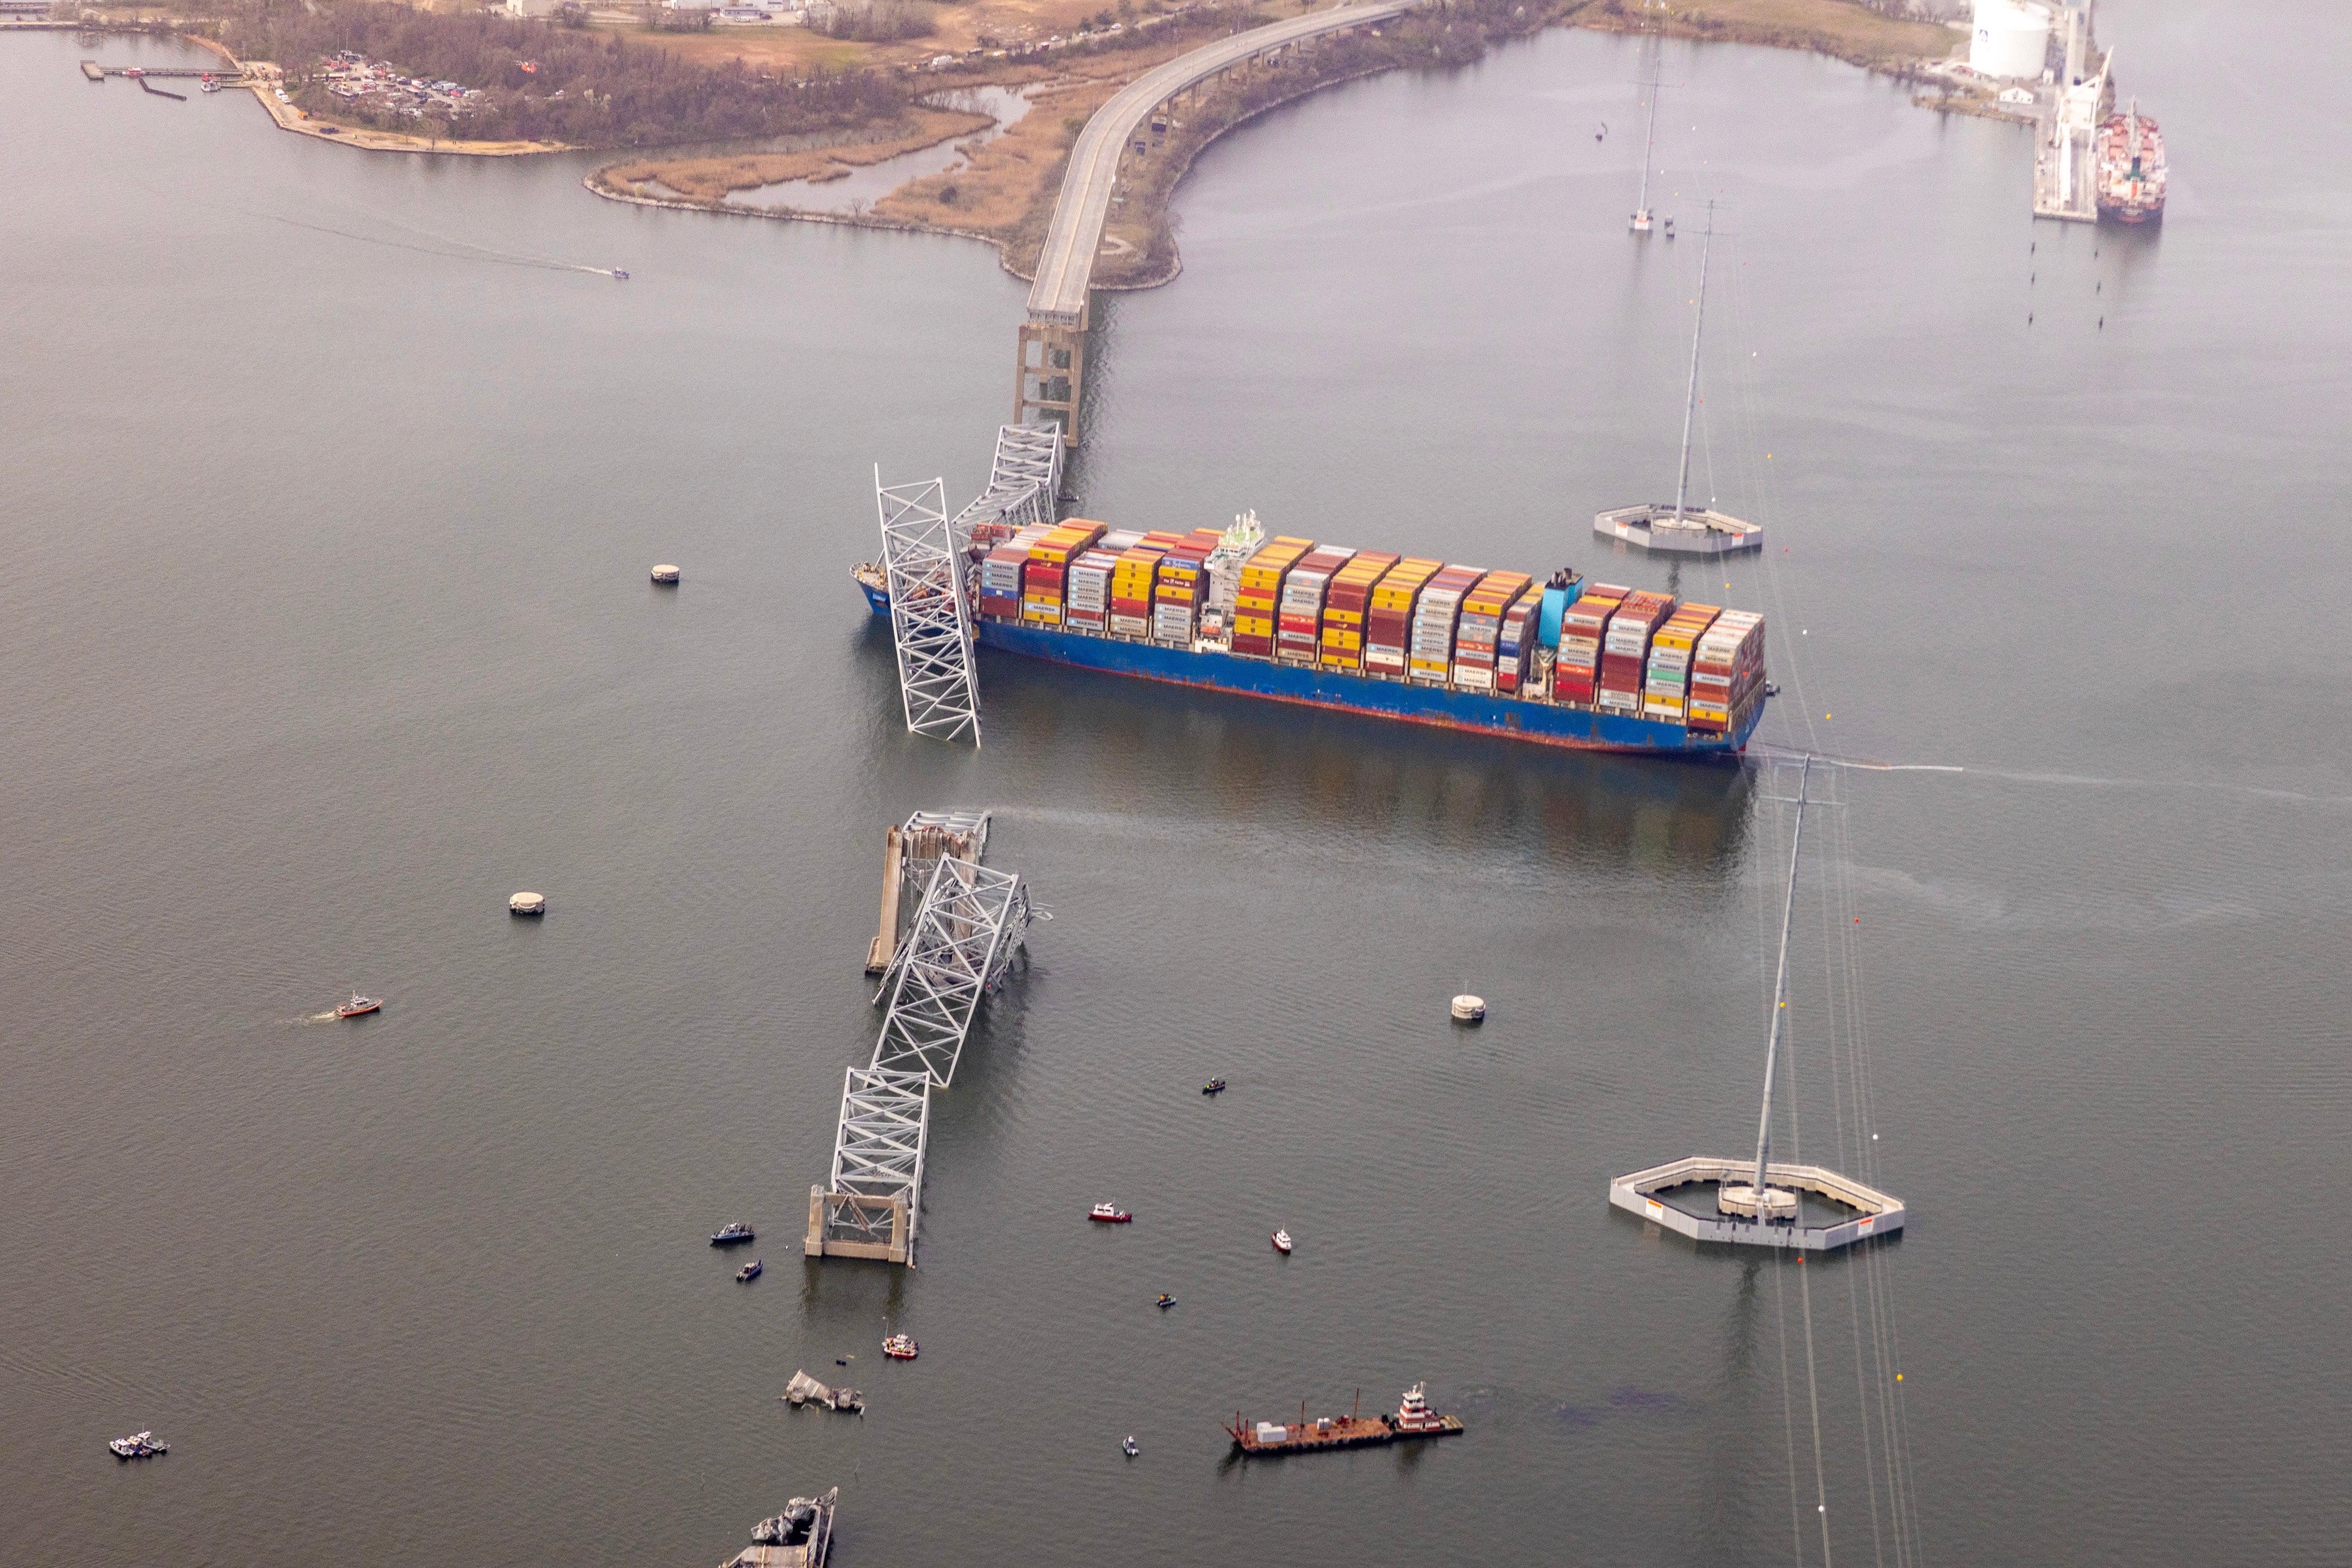 Aerial view of a cargo ship, with pieces of a bridge sticking out of the water.